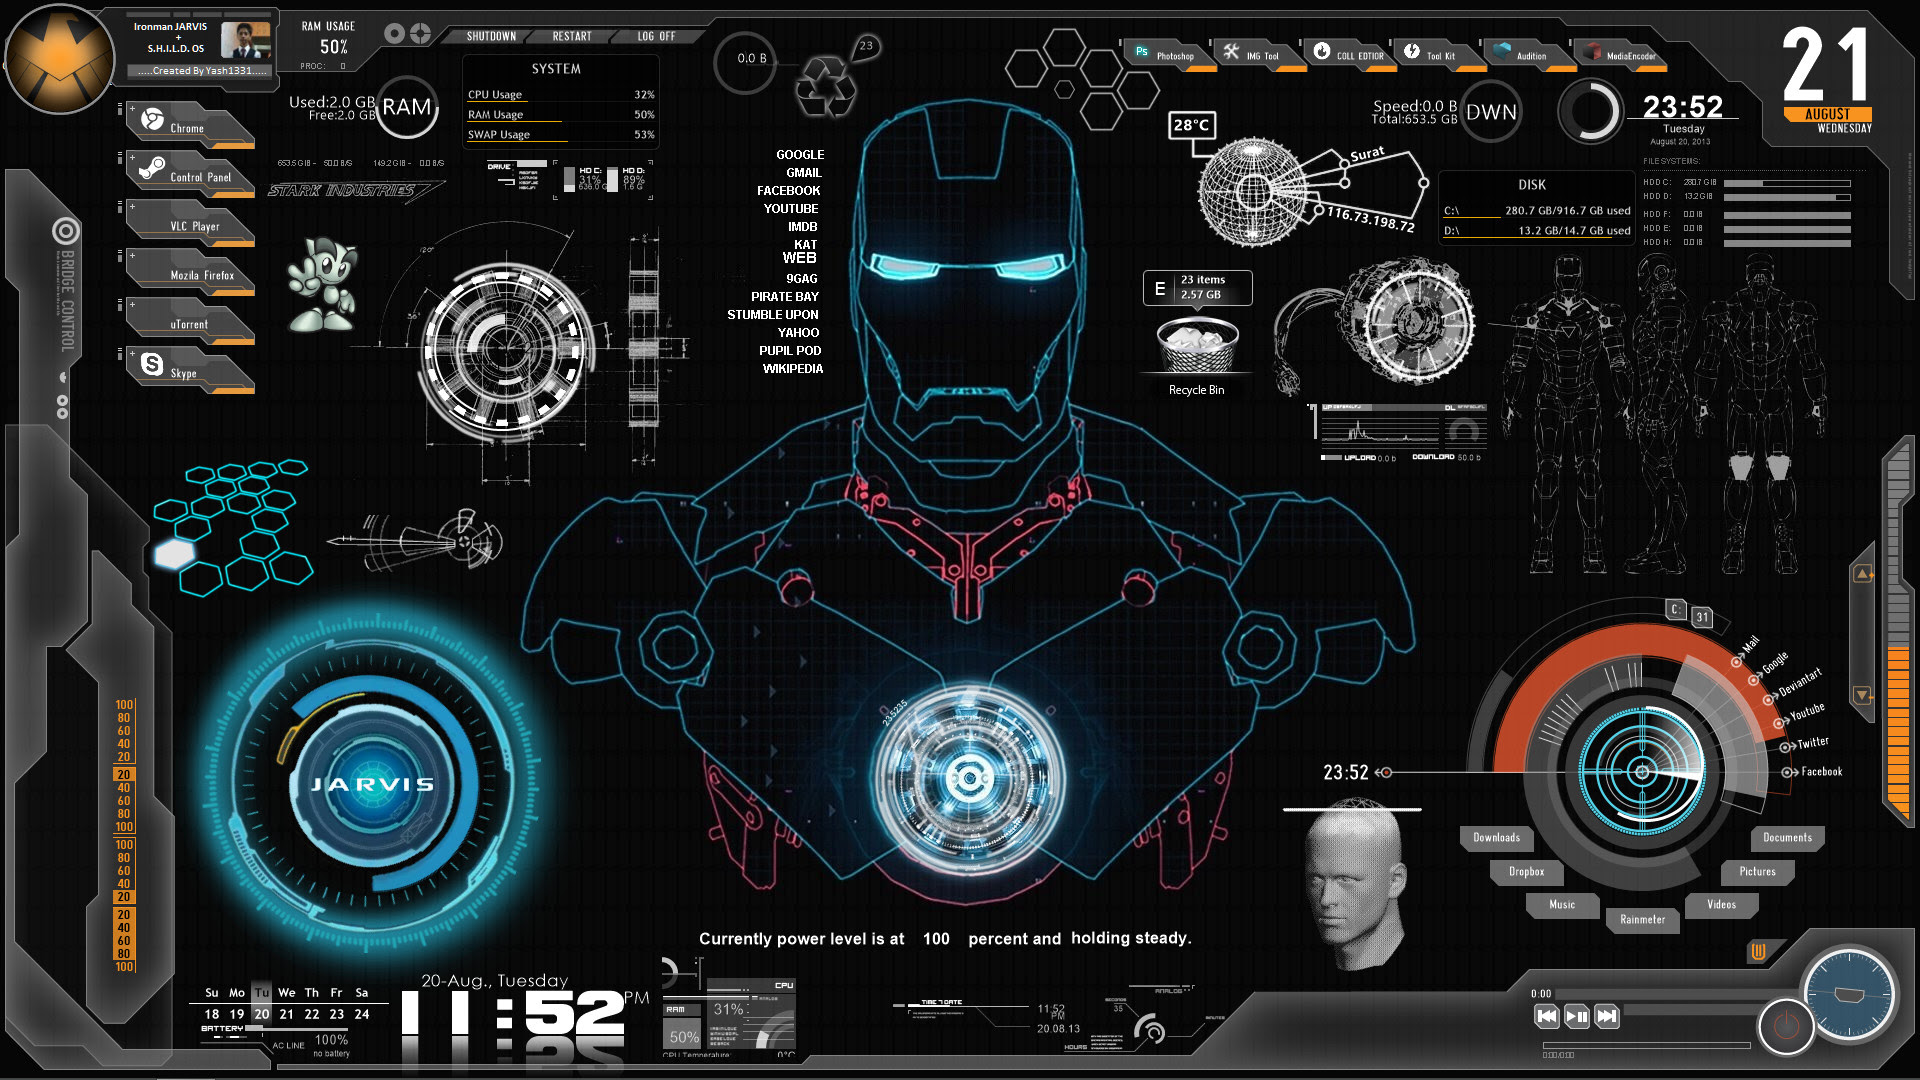 Latest Iron Man Wallpaper Pc In Our Collection Image Drive Test